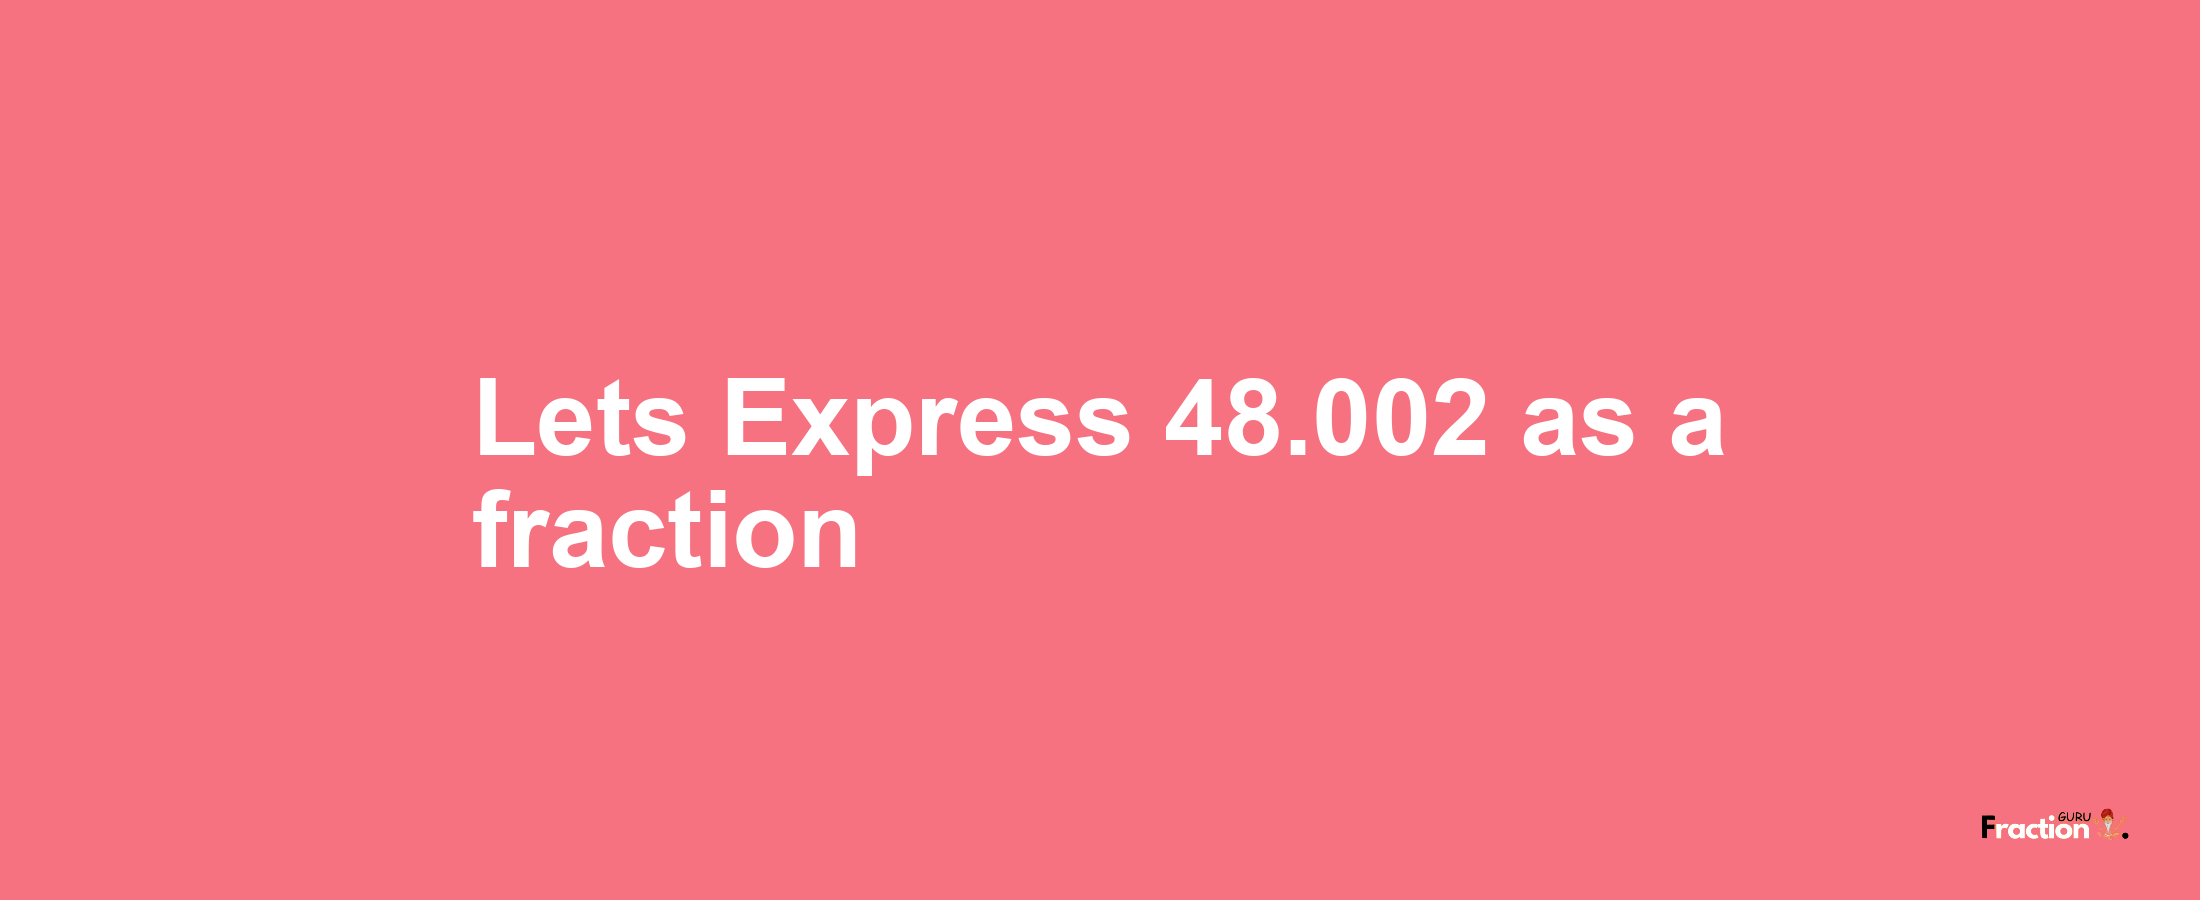 Lets Express 48.002 as afraction